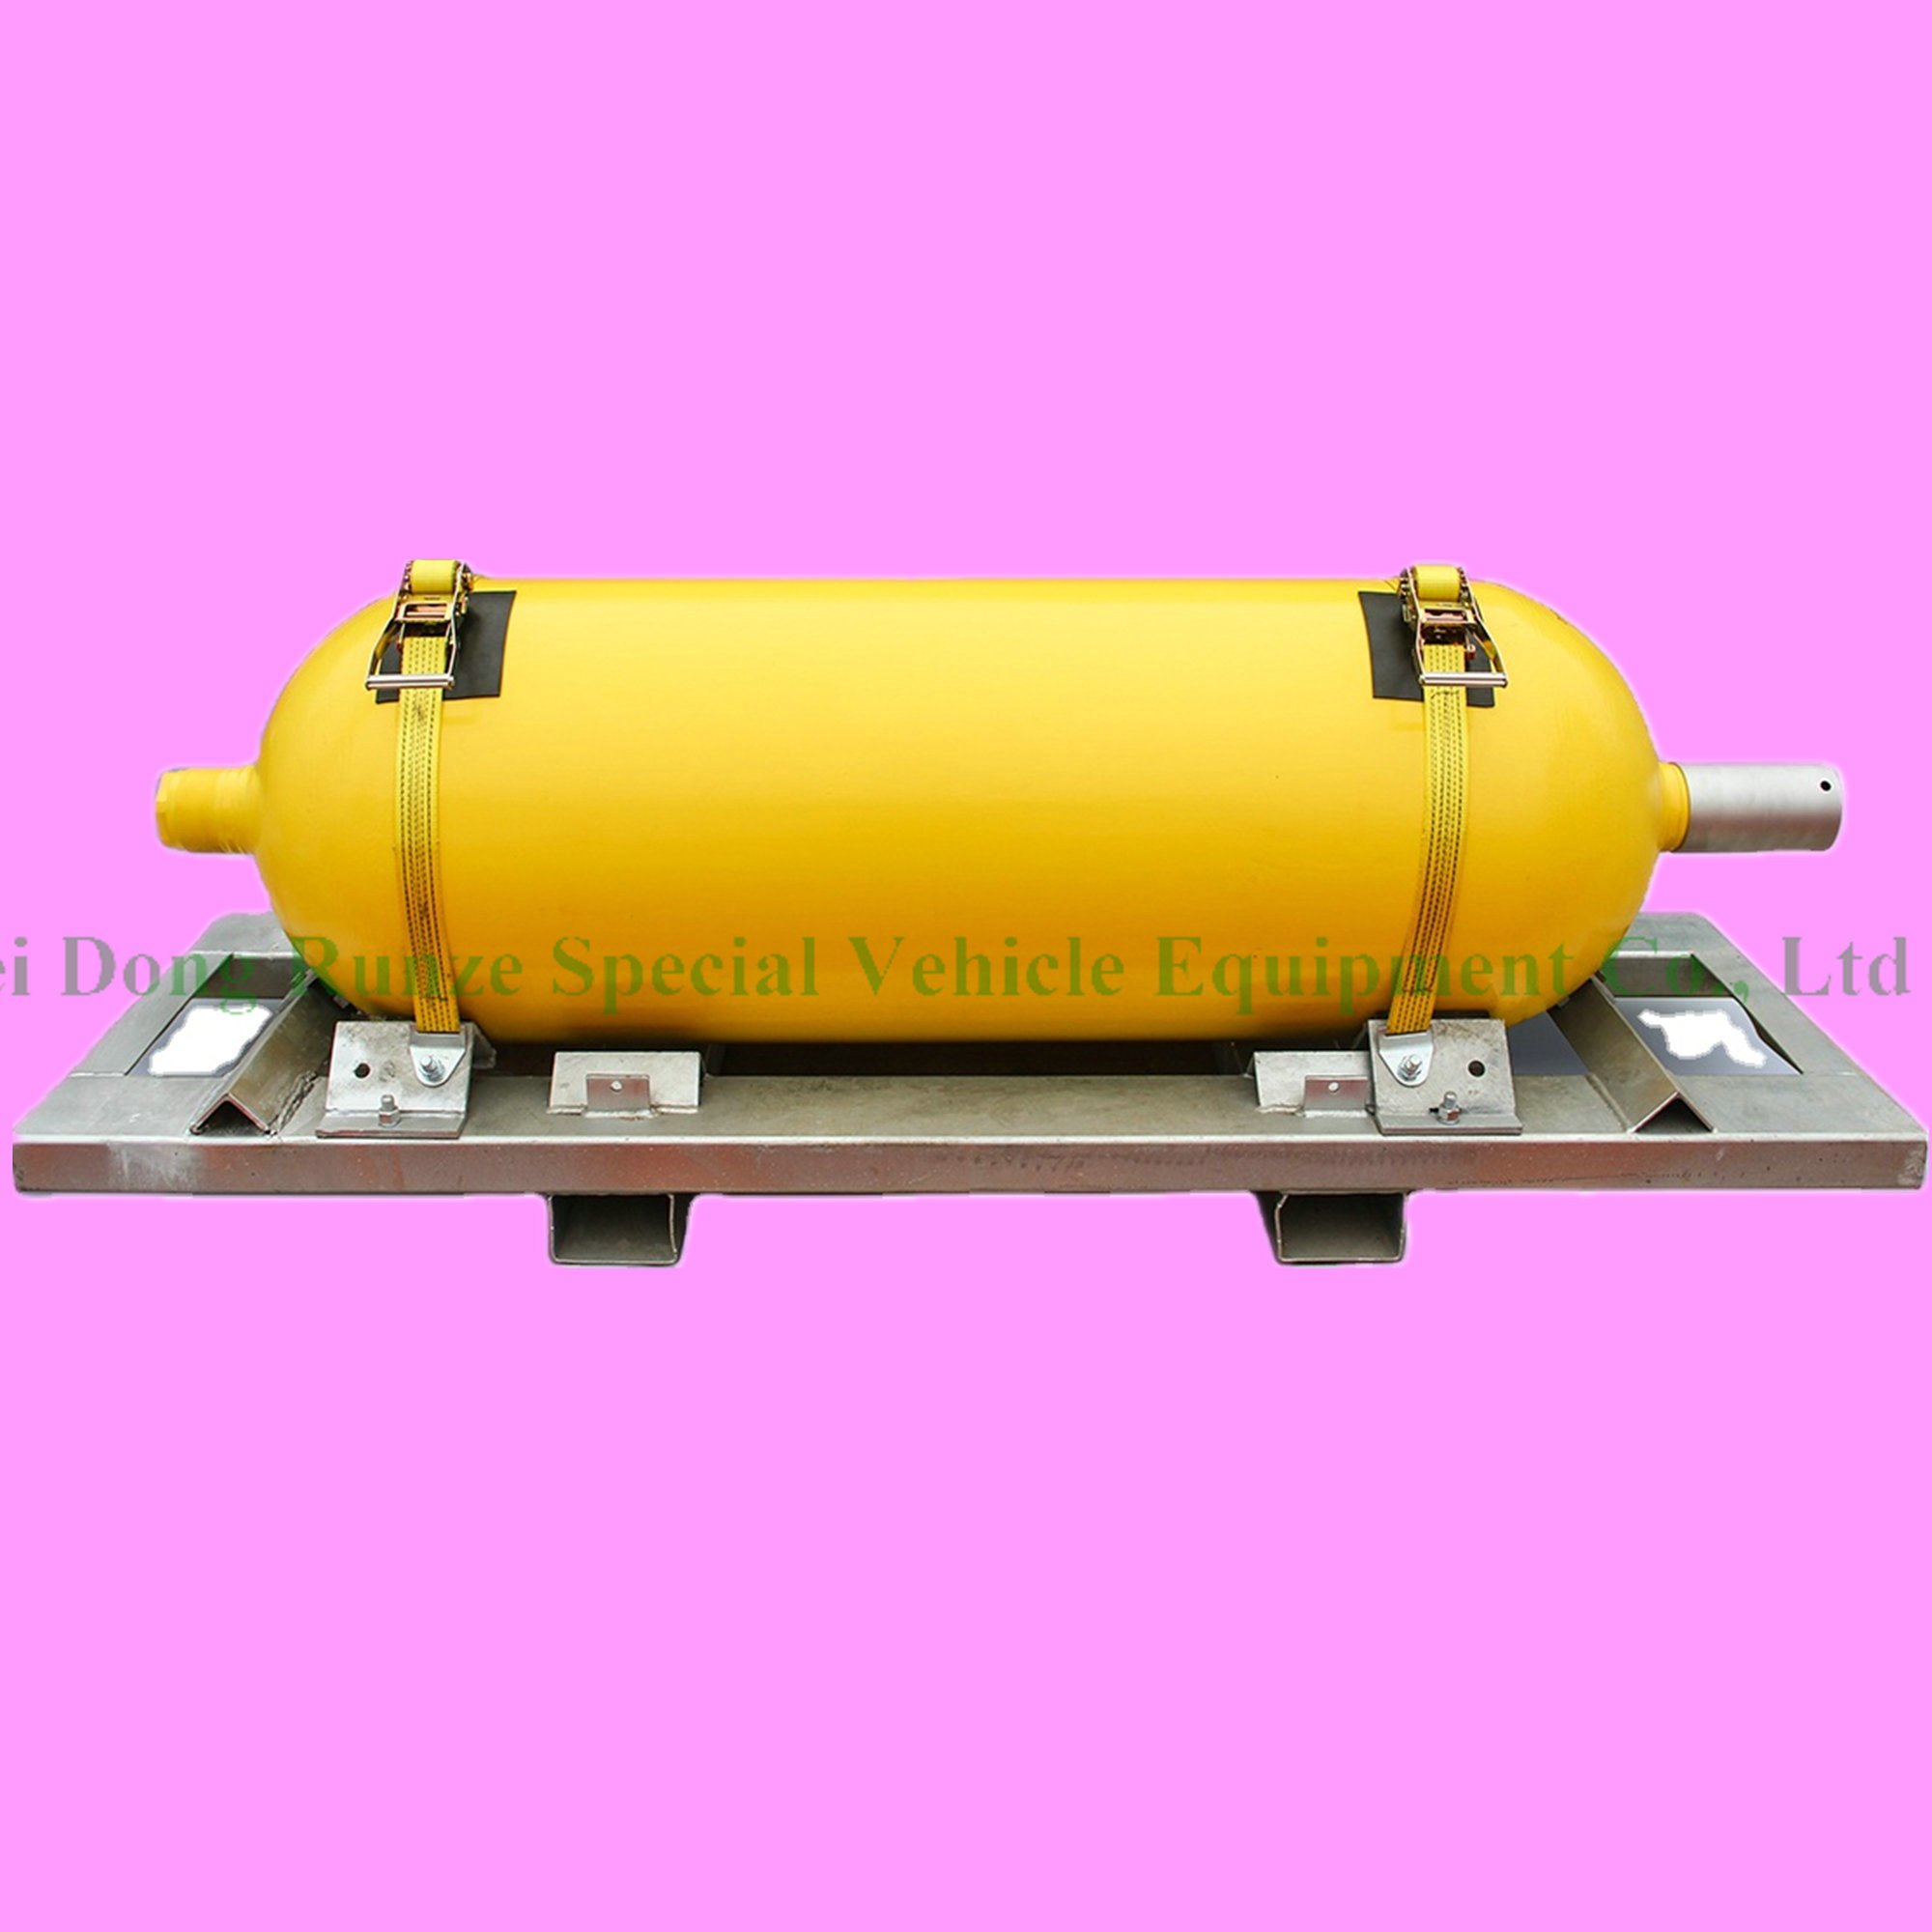 High Purity Electronic Gas Cylinder for CHF3, NF3, Sf6, Sih4, Cl2, N2o 16.6MPa 440L, 470L Skid Mounted Gas Cylinders